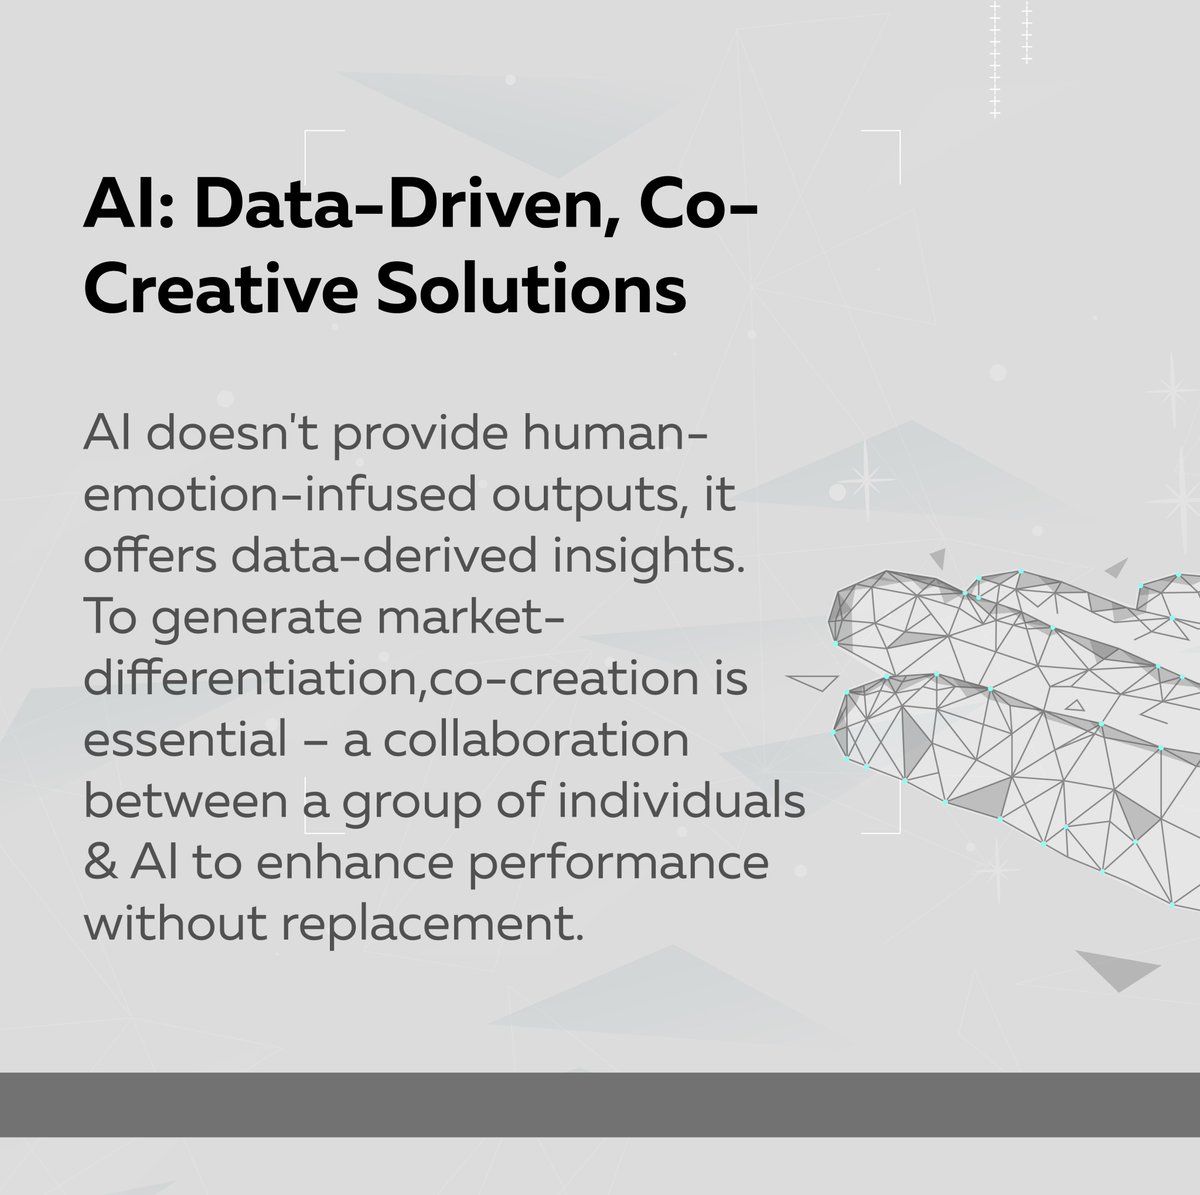 Join our journey as AI revolutionizes efficiency, research, and industry, inspiring co-creation for innovative, performance-elevating solutions. Embrace the future!

#AIInnovation #CoCreation #DataDrivenSolutions #FutureTech